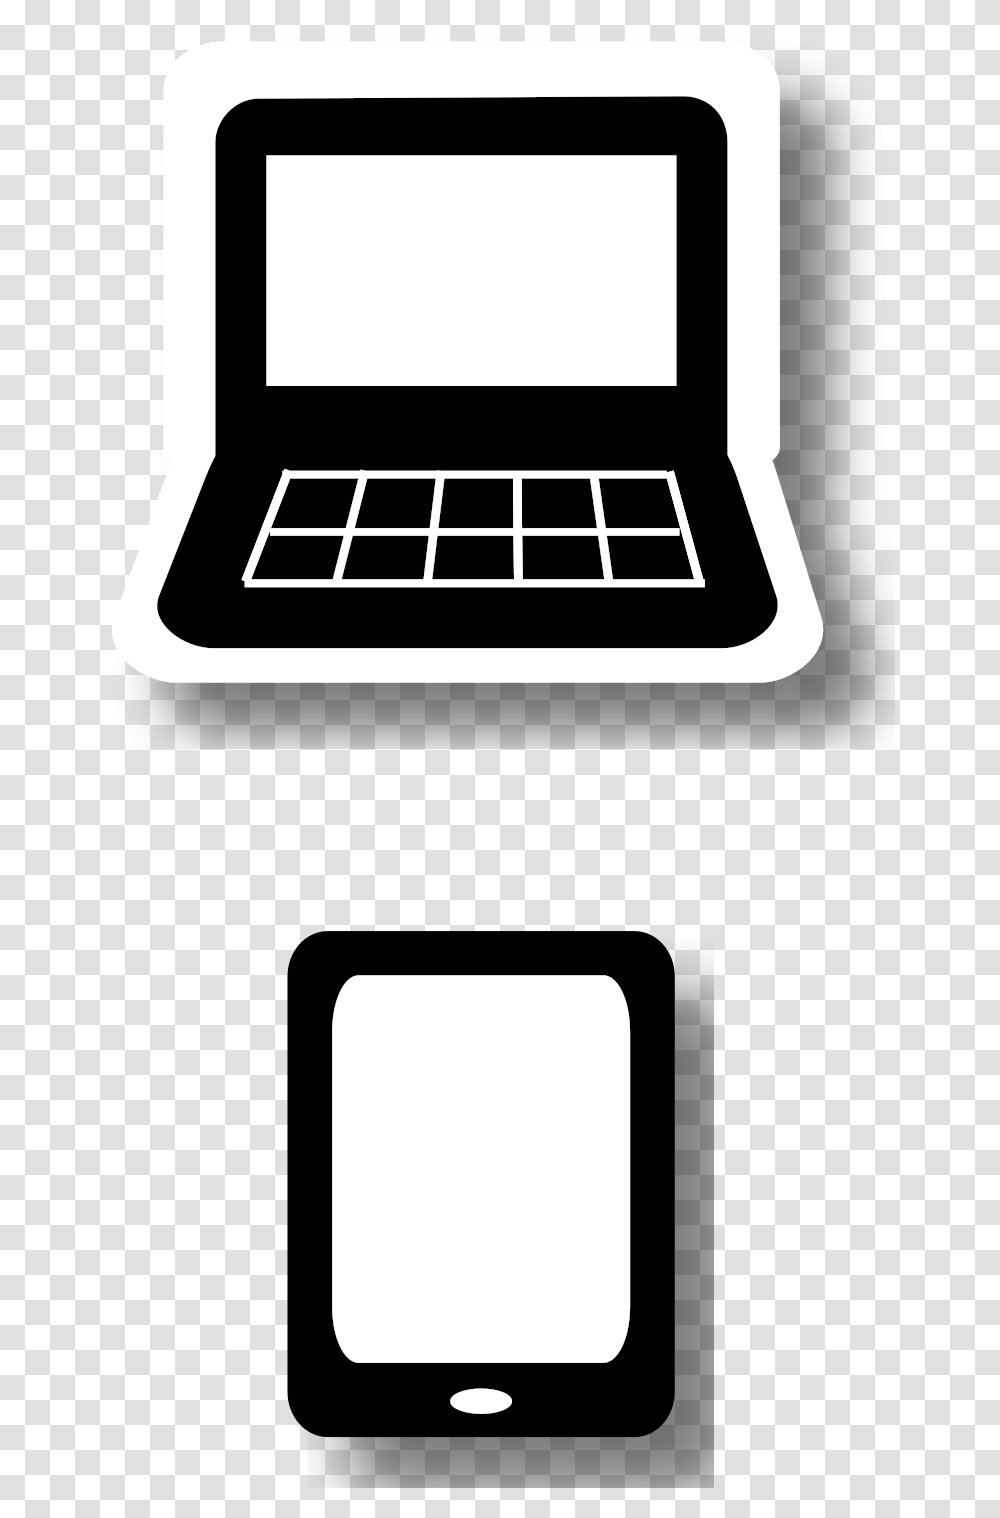 Laptop And Tablet Clip Arts Smartphone, Chair, Furniture, Shopping Cart Transparent Png